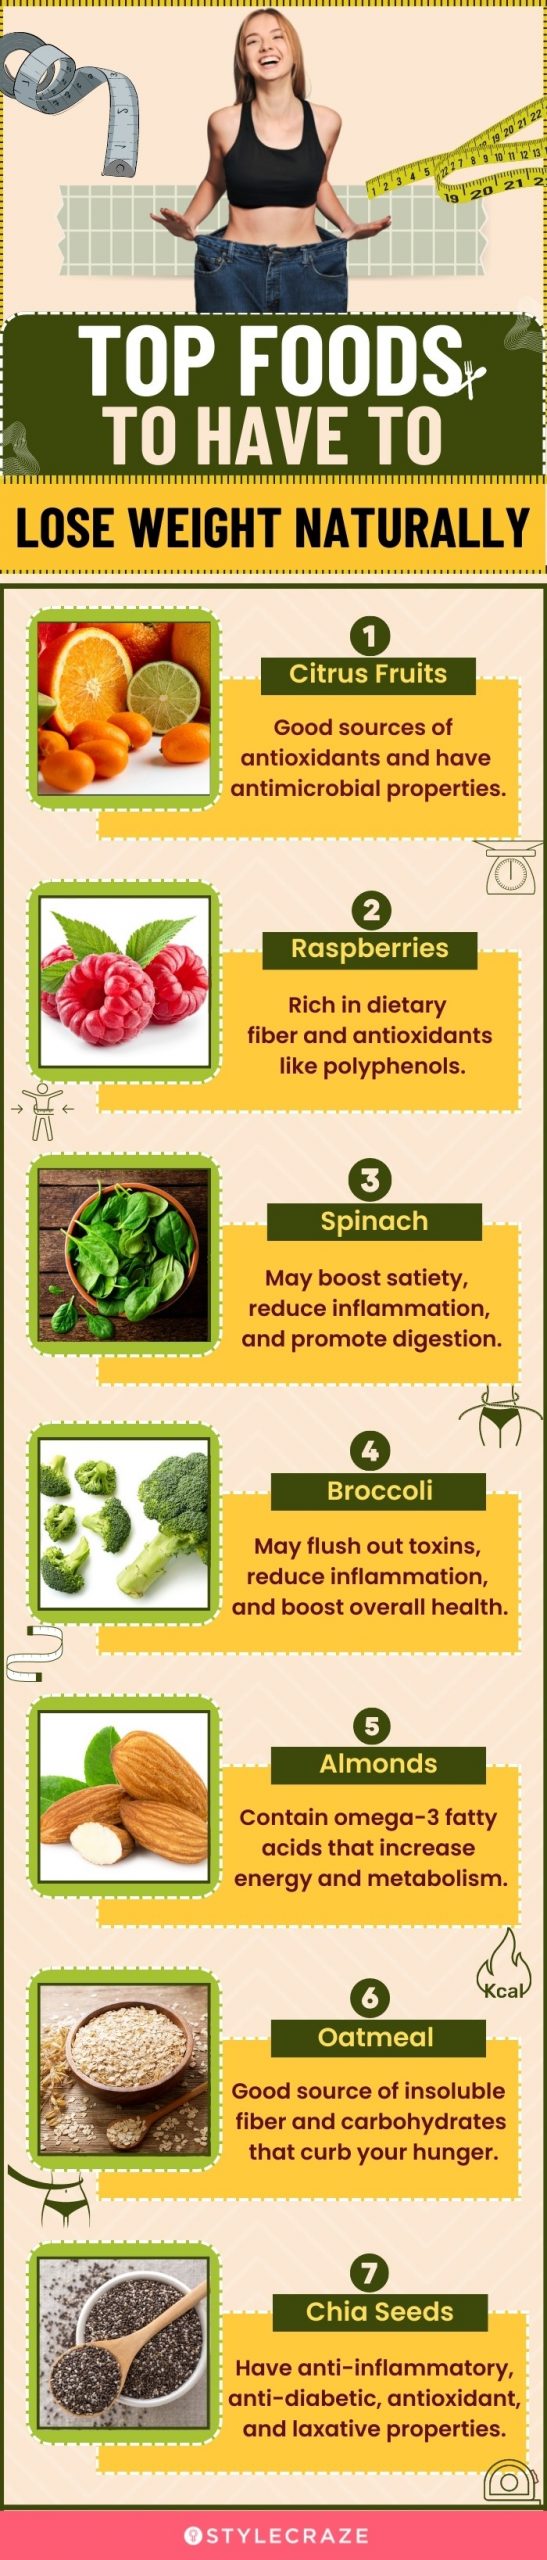 top food for weight lose naturally(infographic)